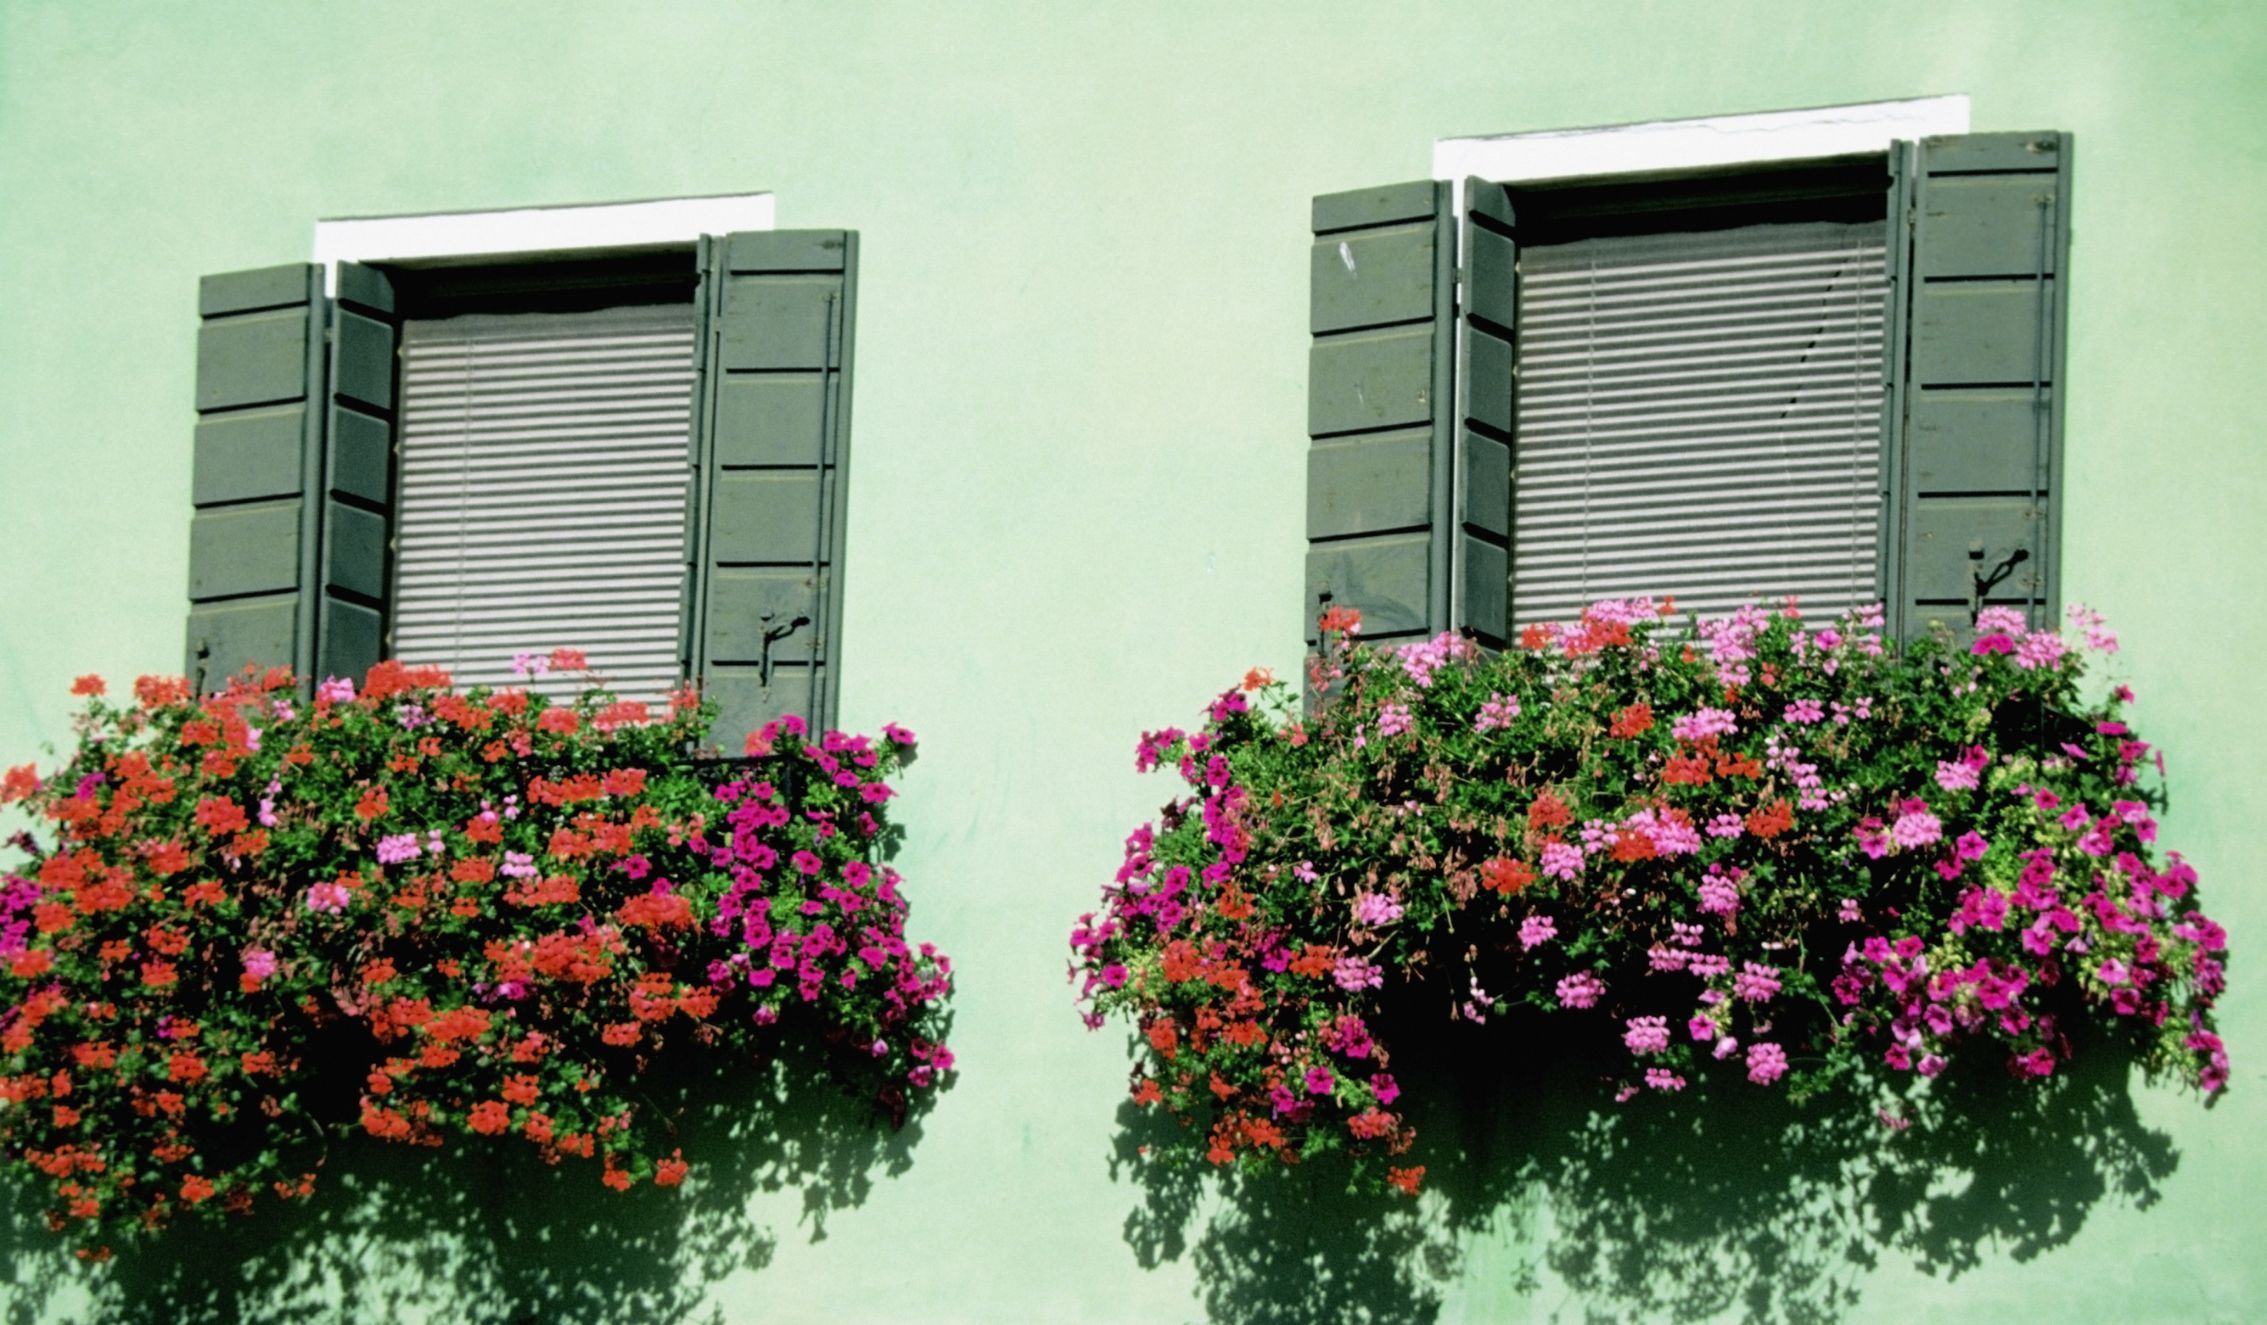 Artificial Flowers for a Window Box | eHow.com -   17 window planting Outdoor ideas